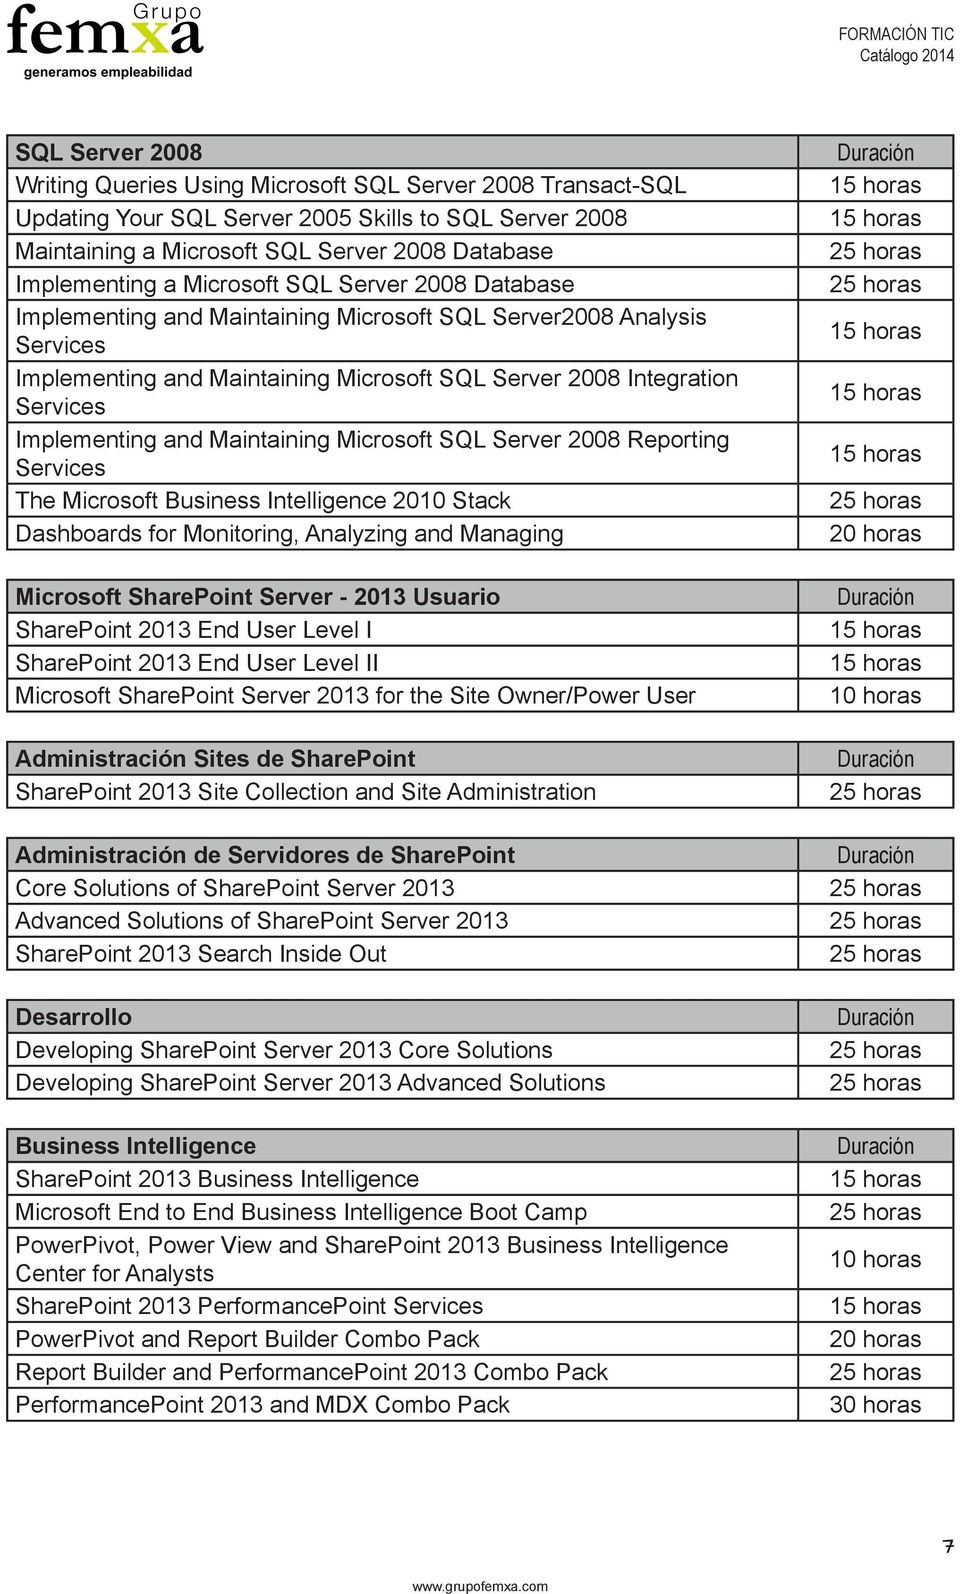 Maintaining Microsoft SQL Server 2008 Reporting Services The Microsoft Business Intelligence 2010 Stack Dashboards for Monitoring, Analyzing and Managing Microsoft SharePoint Server - 2013 Usuario